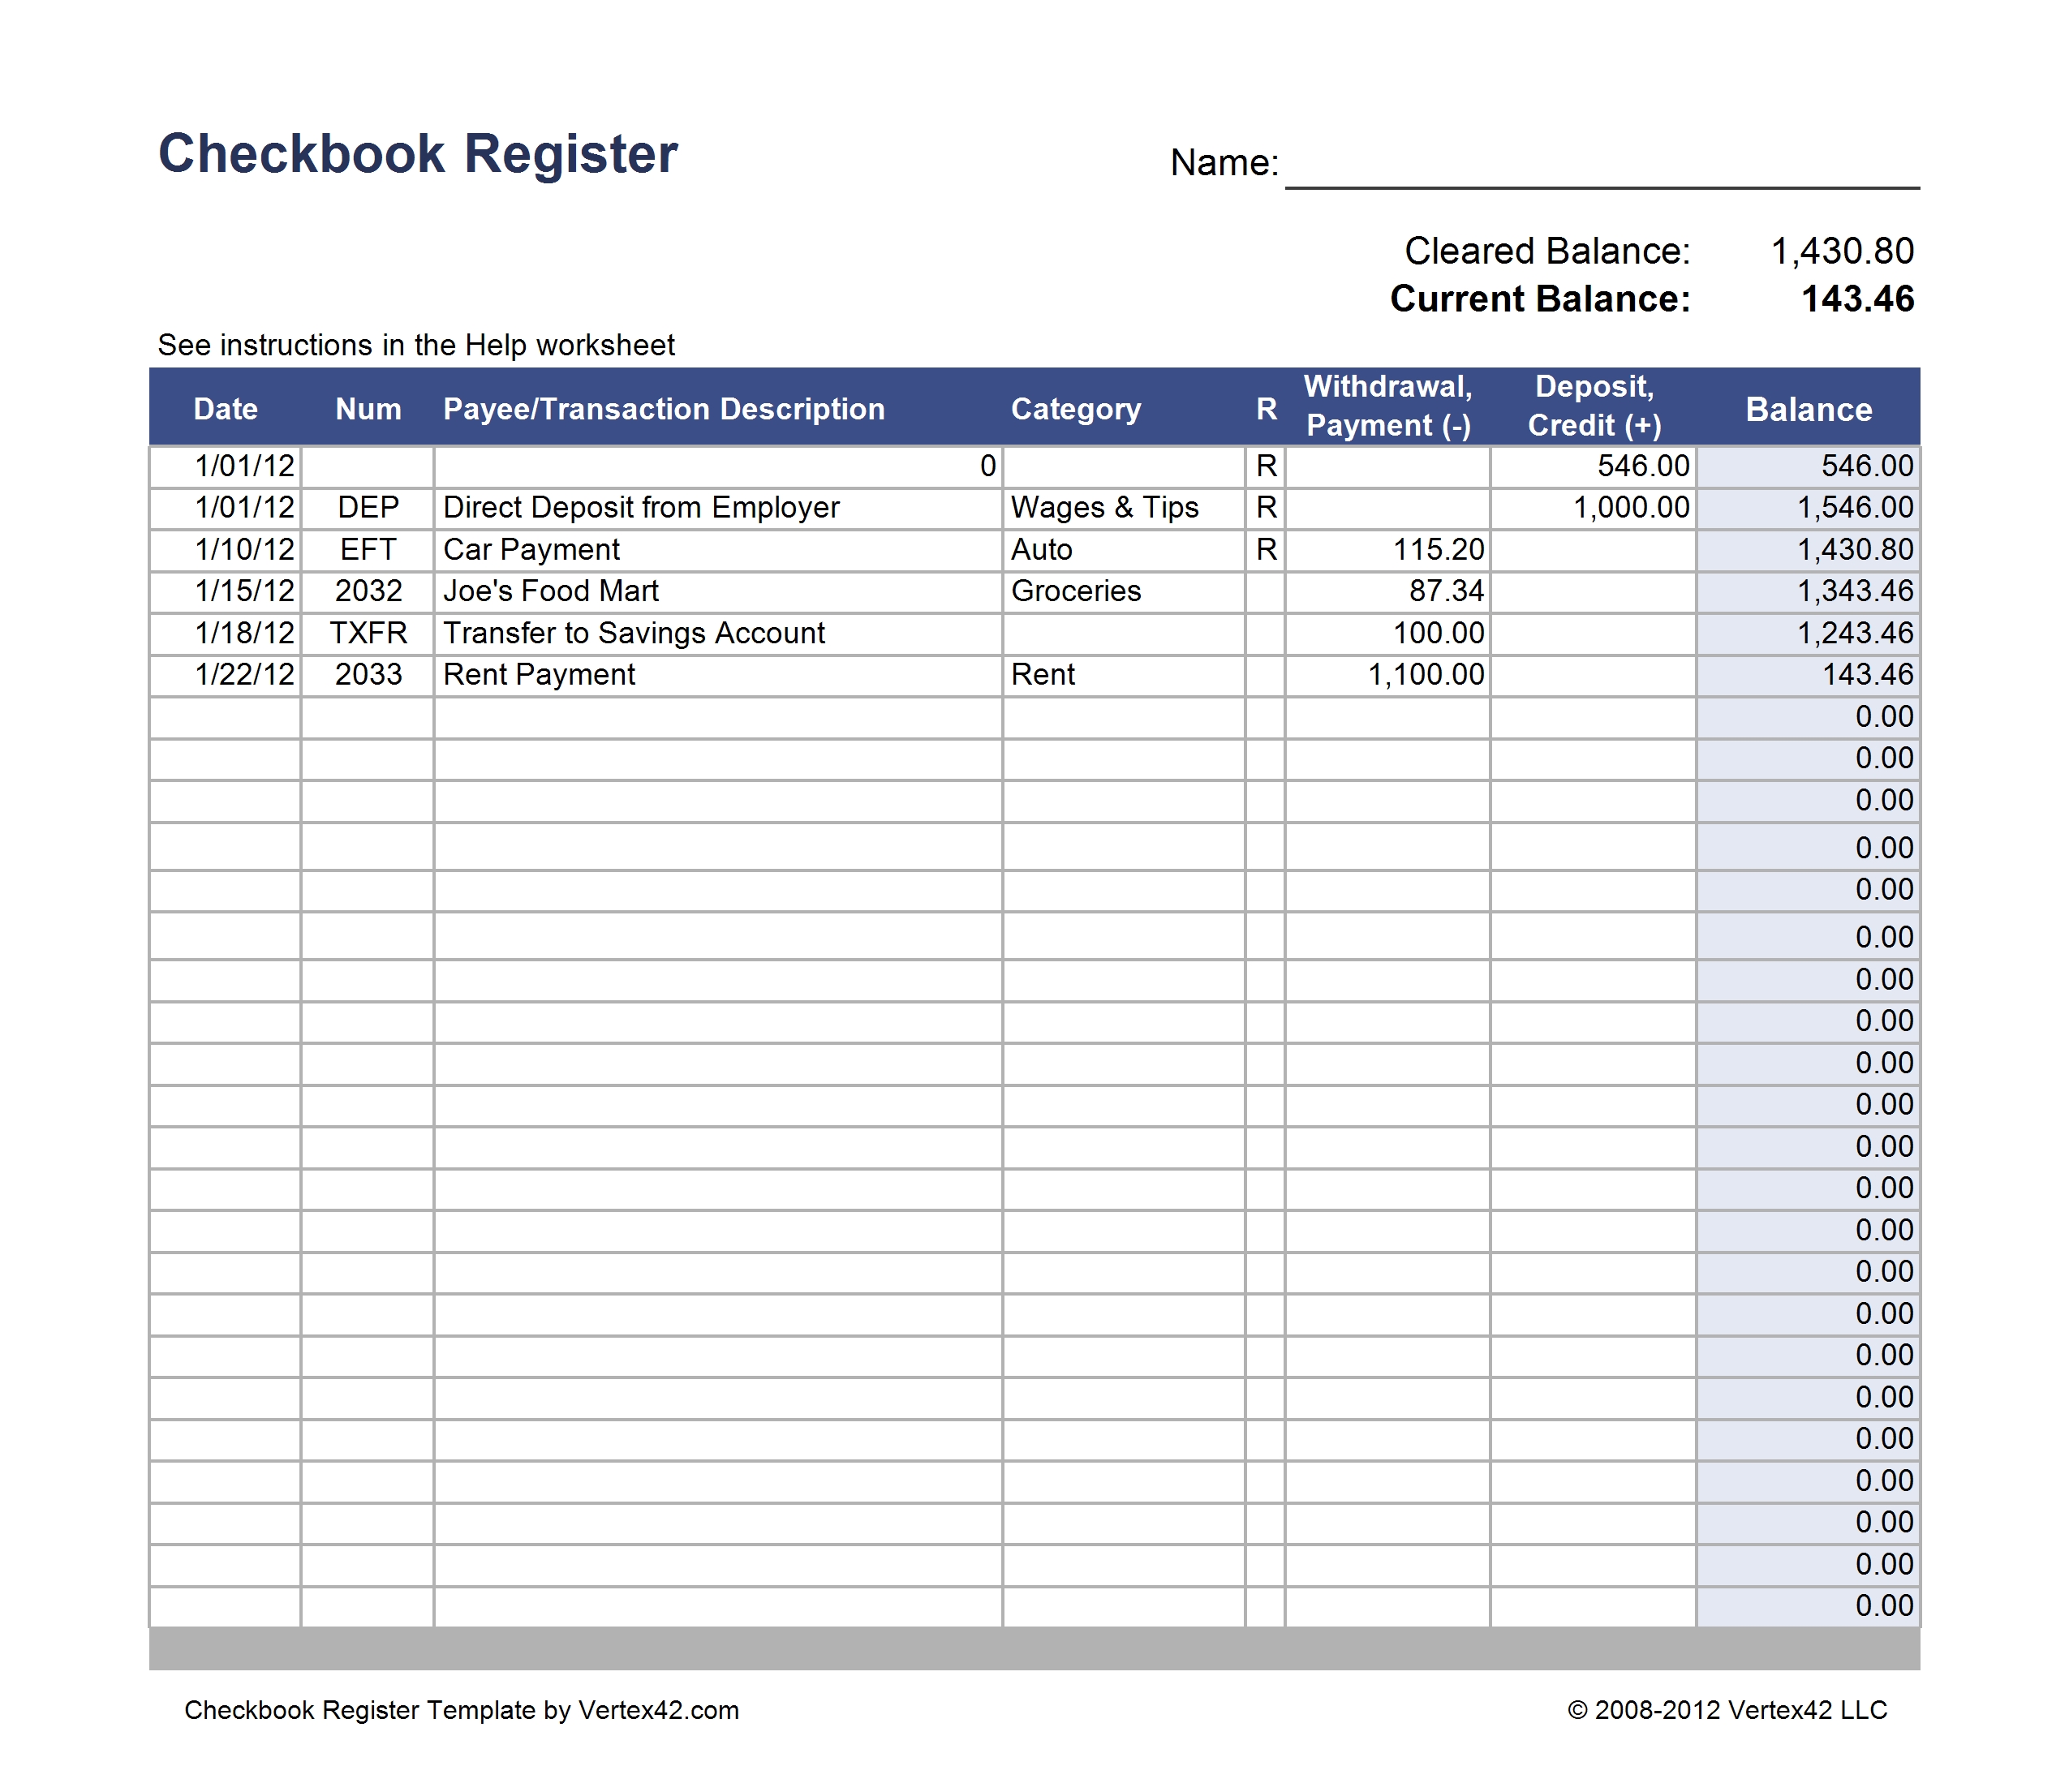 concise checkbook register example